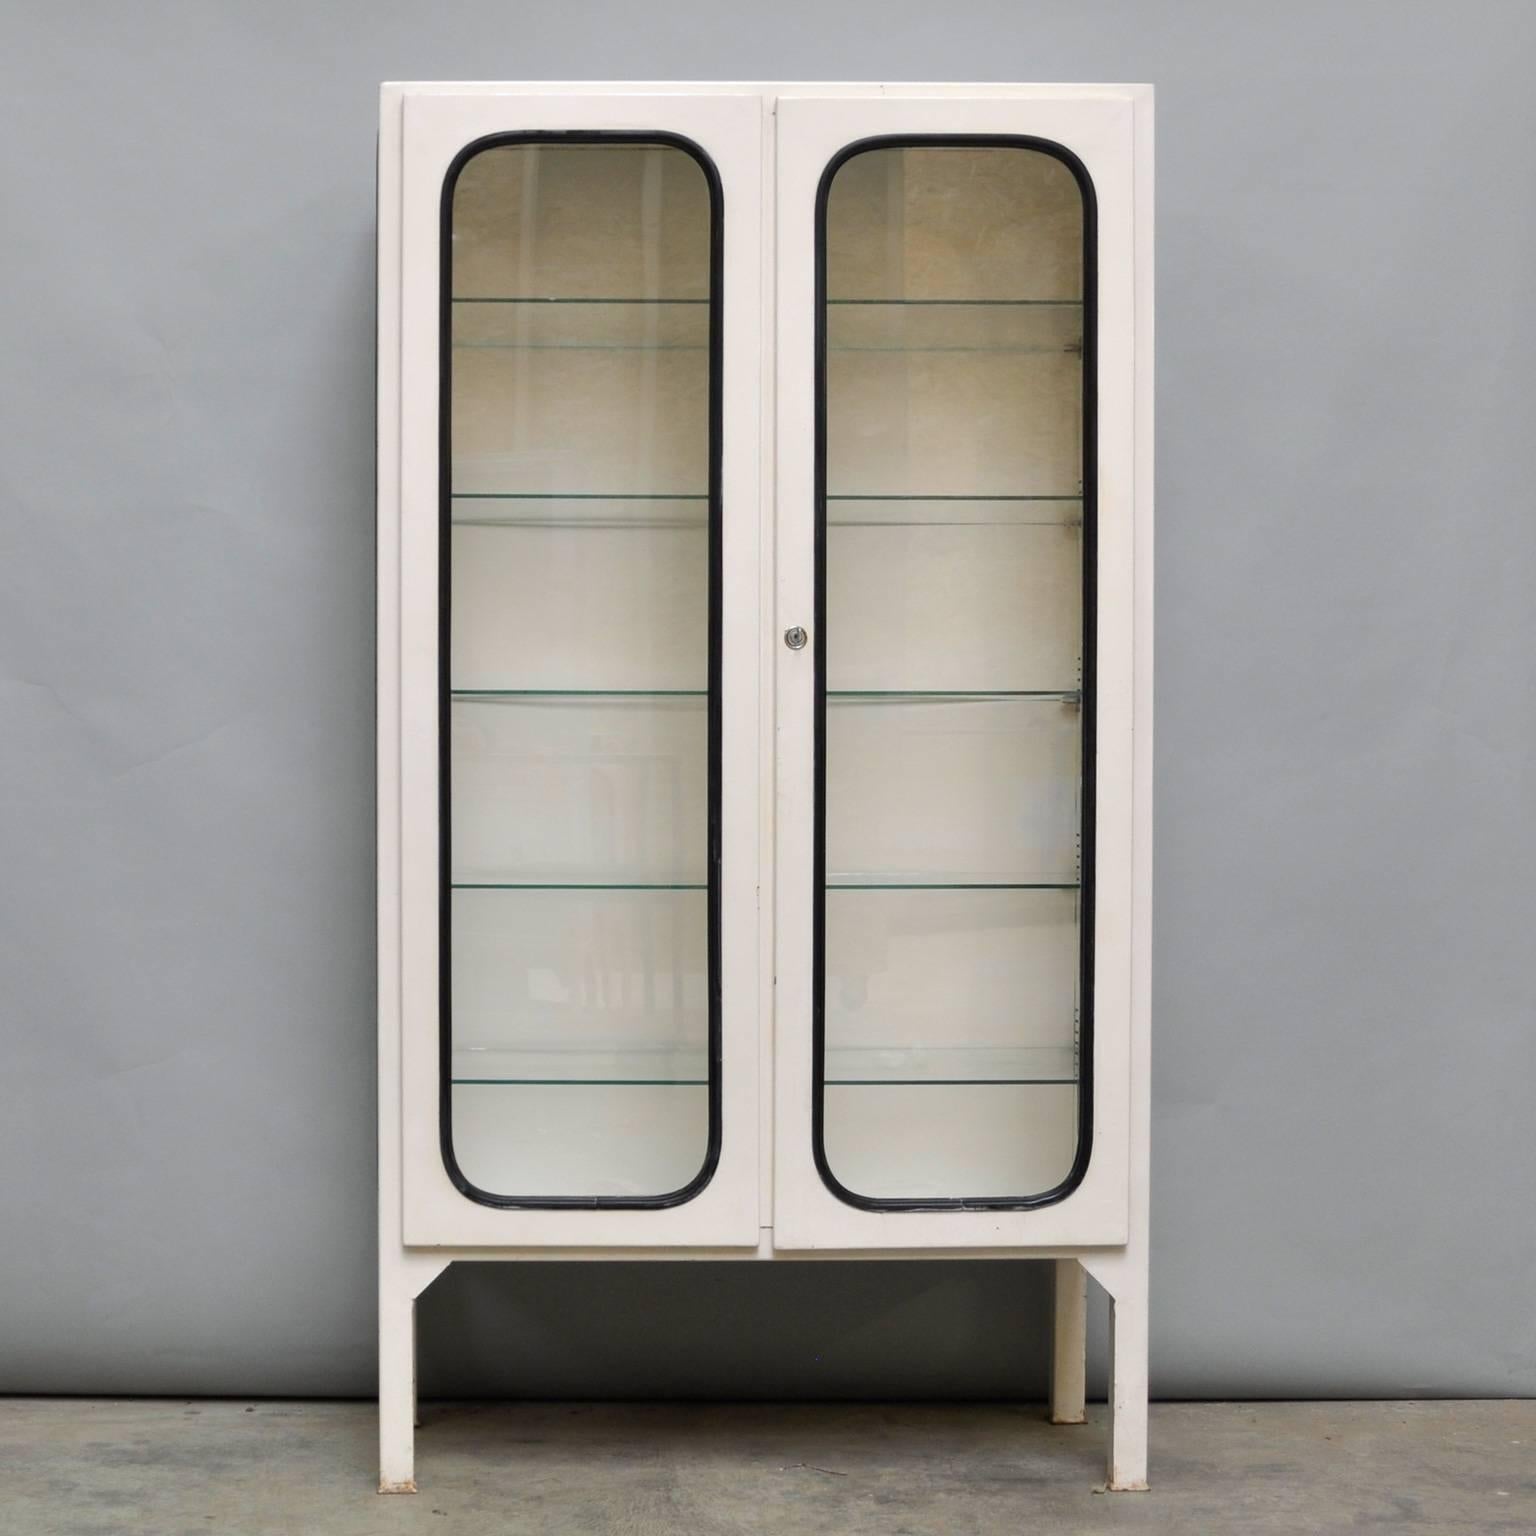 This medicine cabinet was designed in the 1970s and was produced, circa 1975 in Hungary. The piece is made from steel and antique glass, and the glass is held by a black rubber strip. The cabinet features five new adjustable glass shelves and a